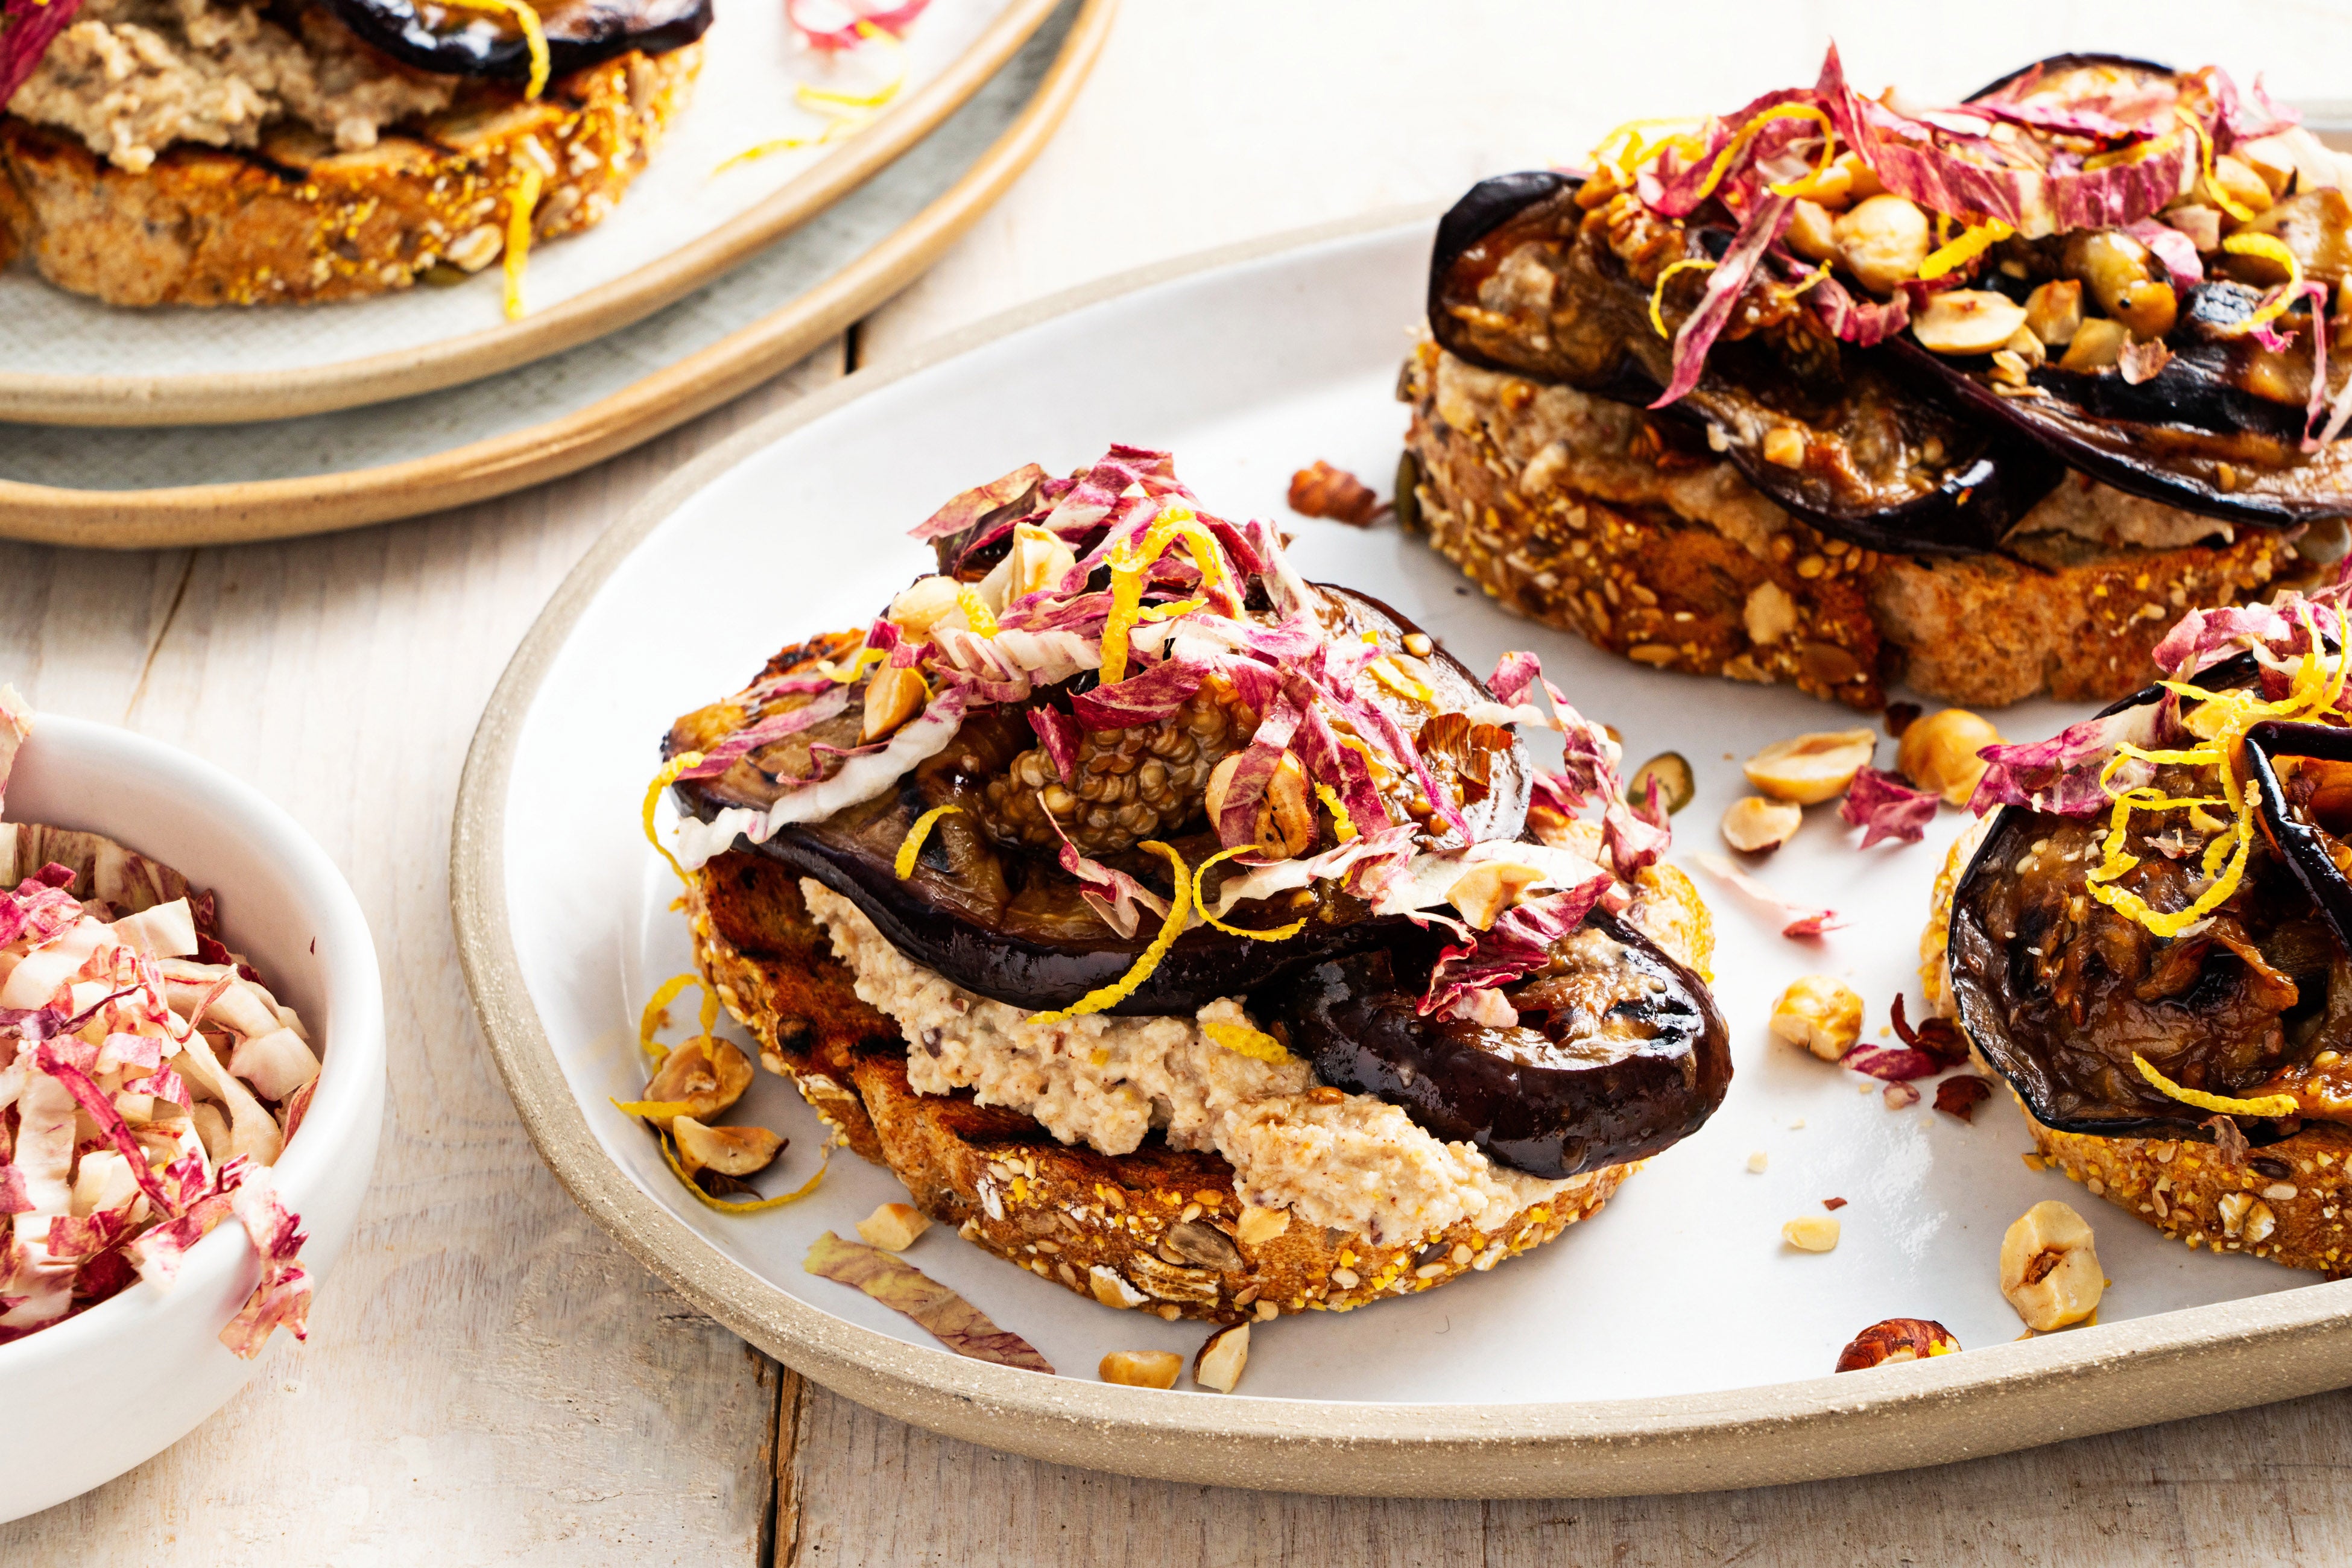 Skordalia, a garlicky Greek spread of nuts, bread and potatoes, anchors these hearty toasts